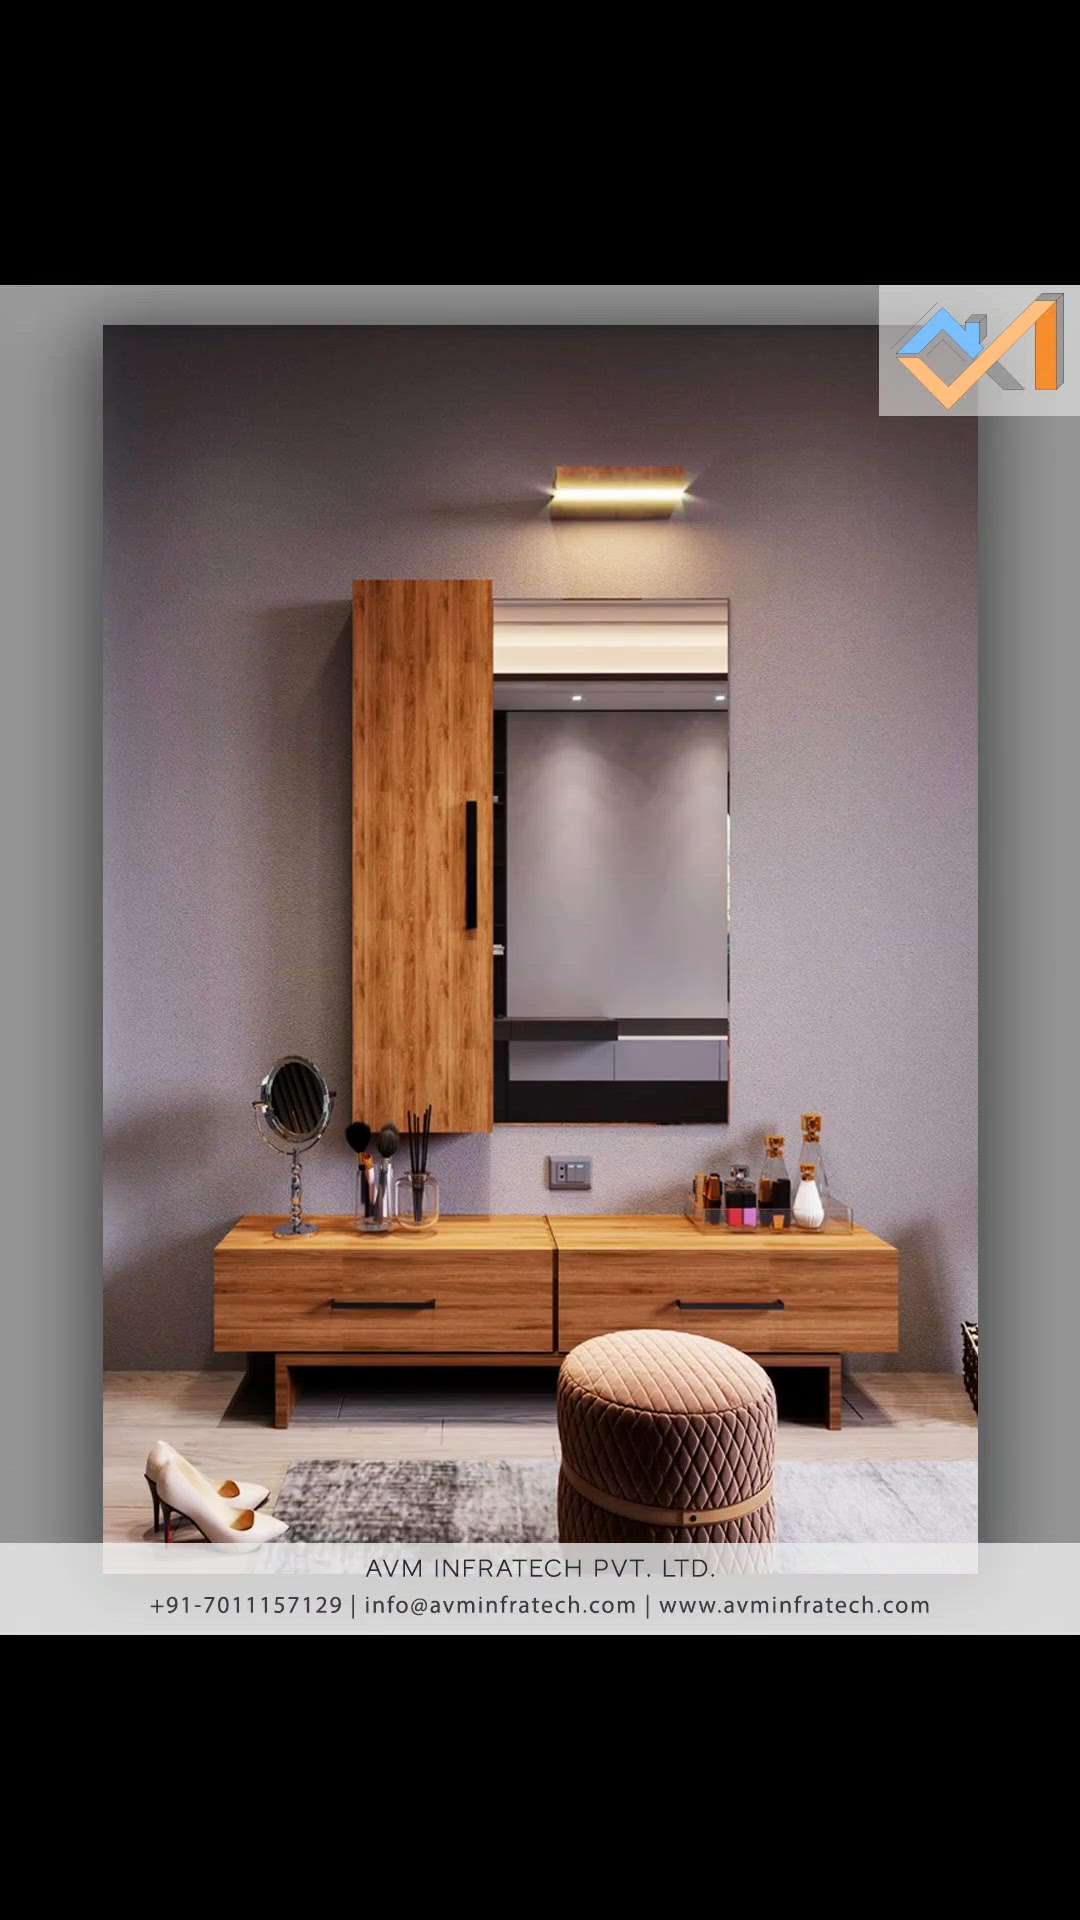 A basic dressing table with a simple design and made of engineered wood can be a good addition to your master bedroom.


Follow us for more such amazing updates. 
.
.
#dressing #dressingroom #dressingtable #dressingup #dressingrooms #dressingroomgoals #dressingroomdecor #dressingtabledecor #engineered #makeup #mirror #mirrormirror #avminfratech #gettingready